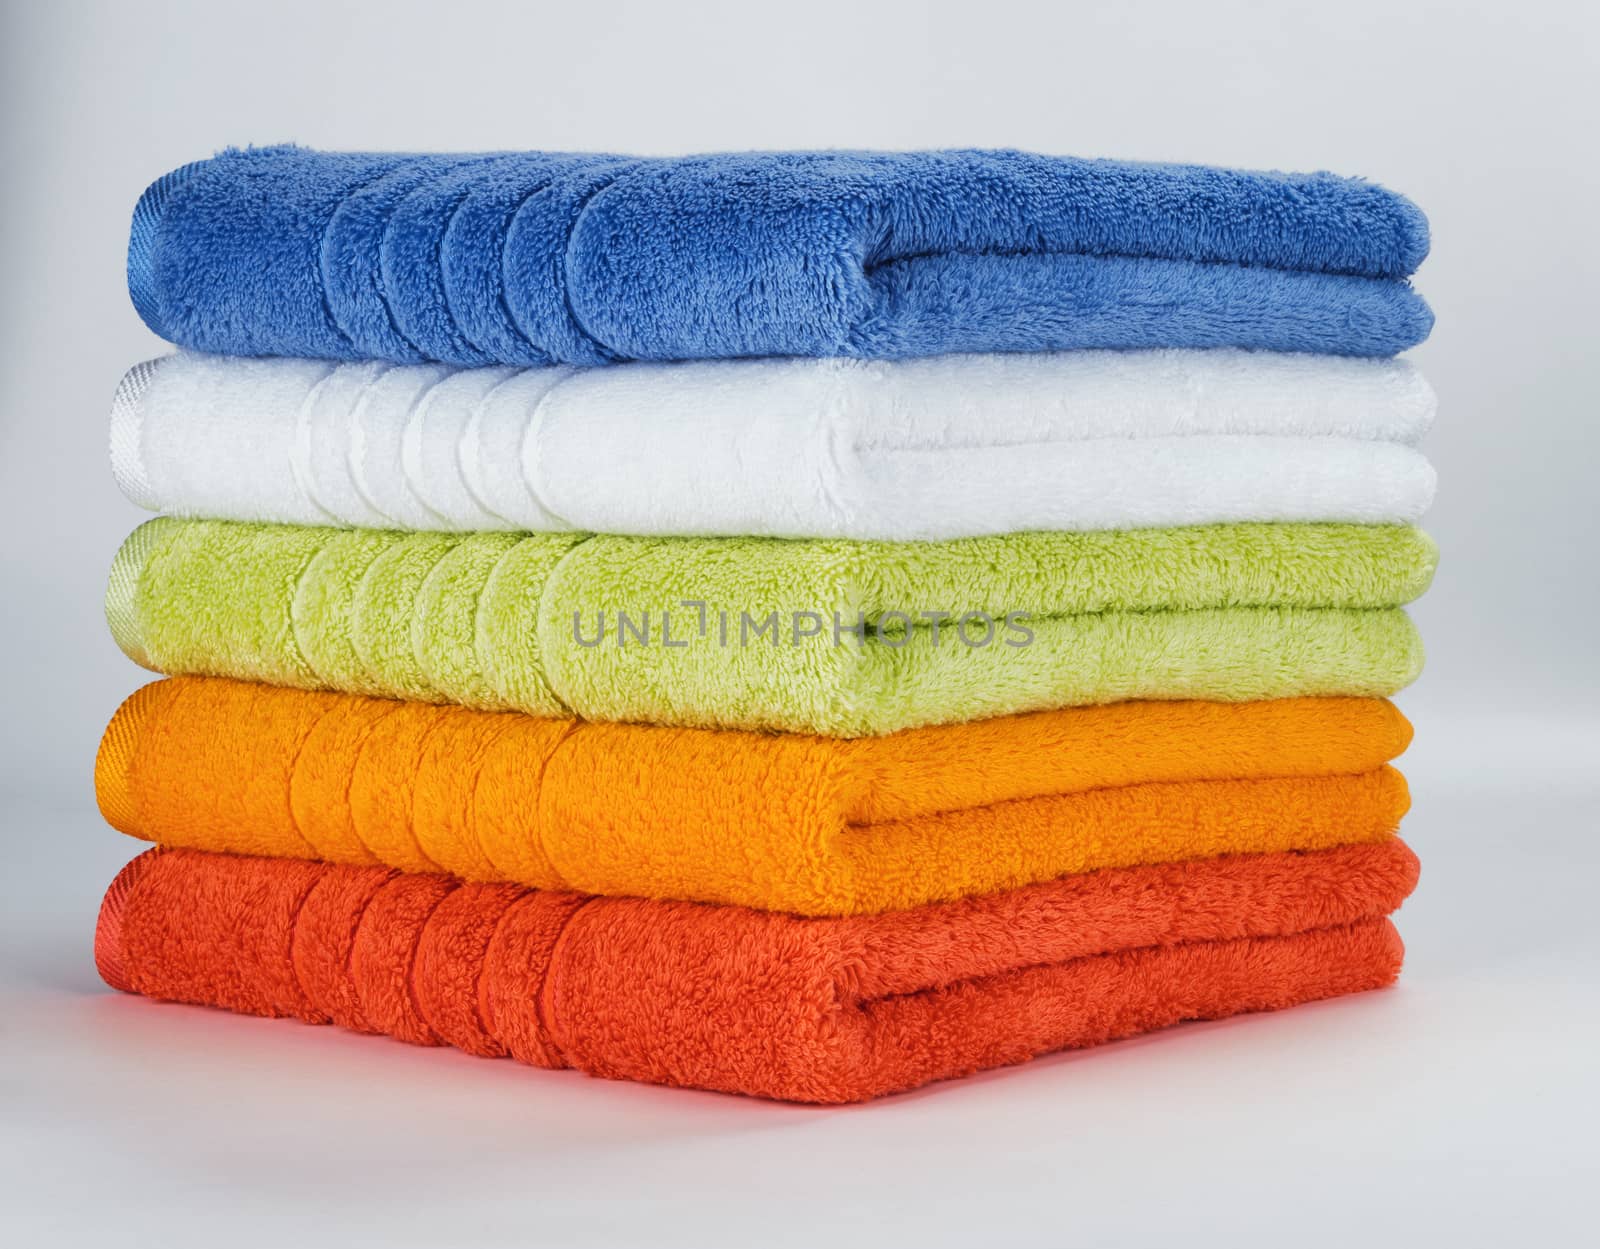 Multicolored towels on a white background by hanusst